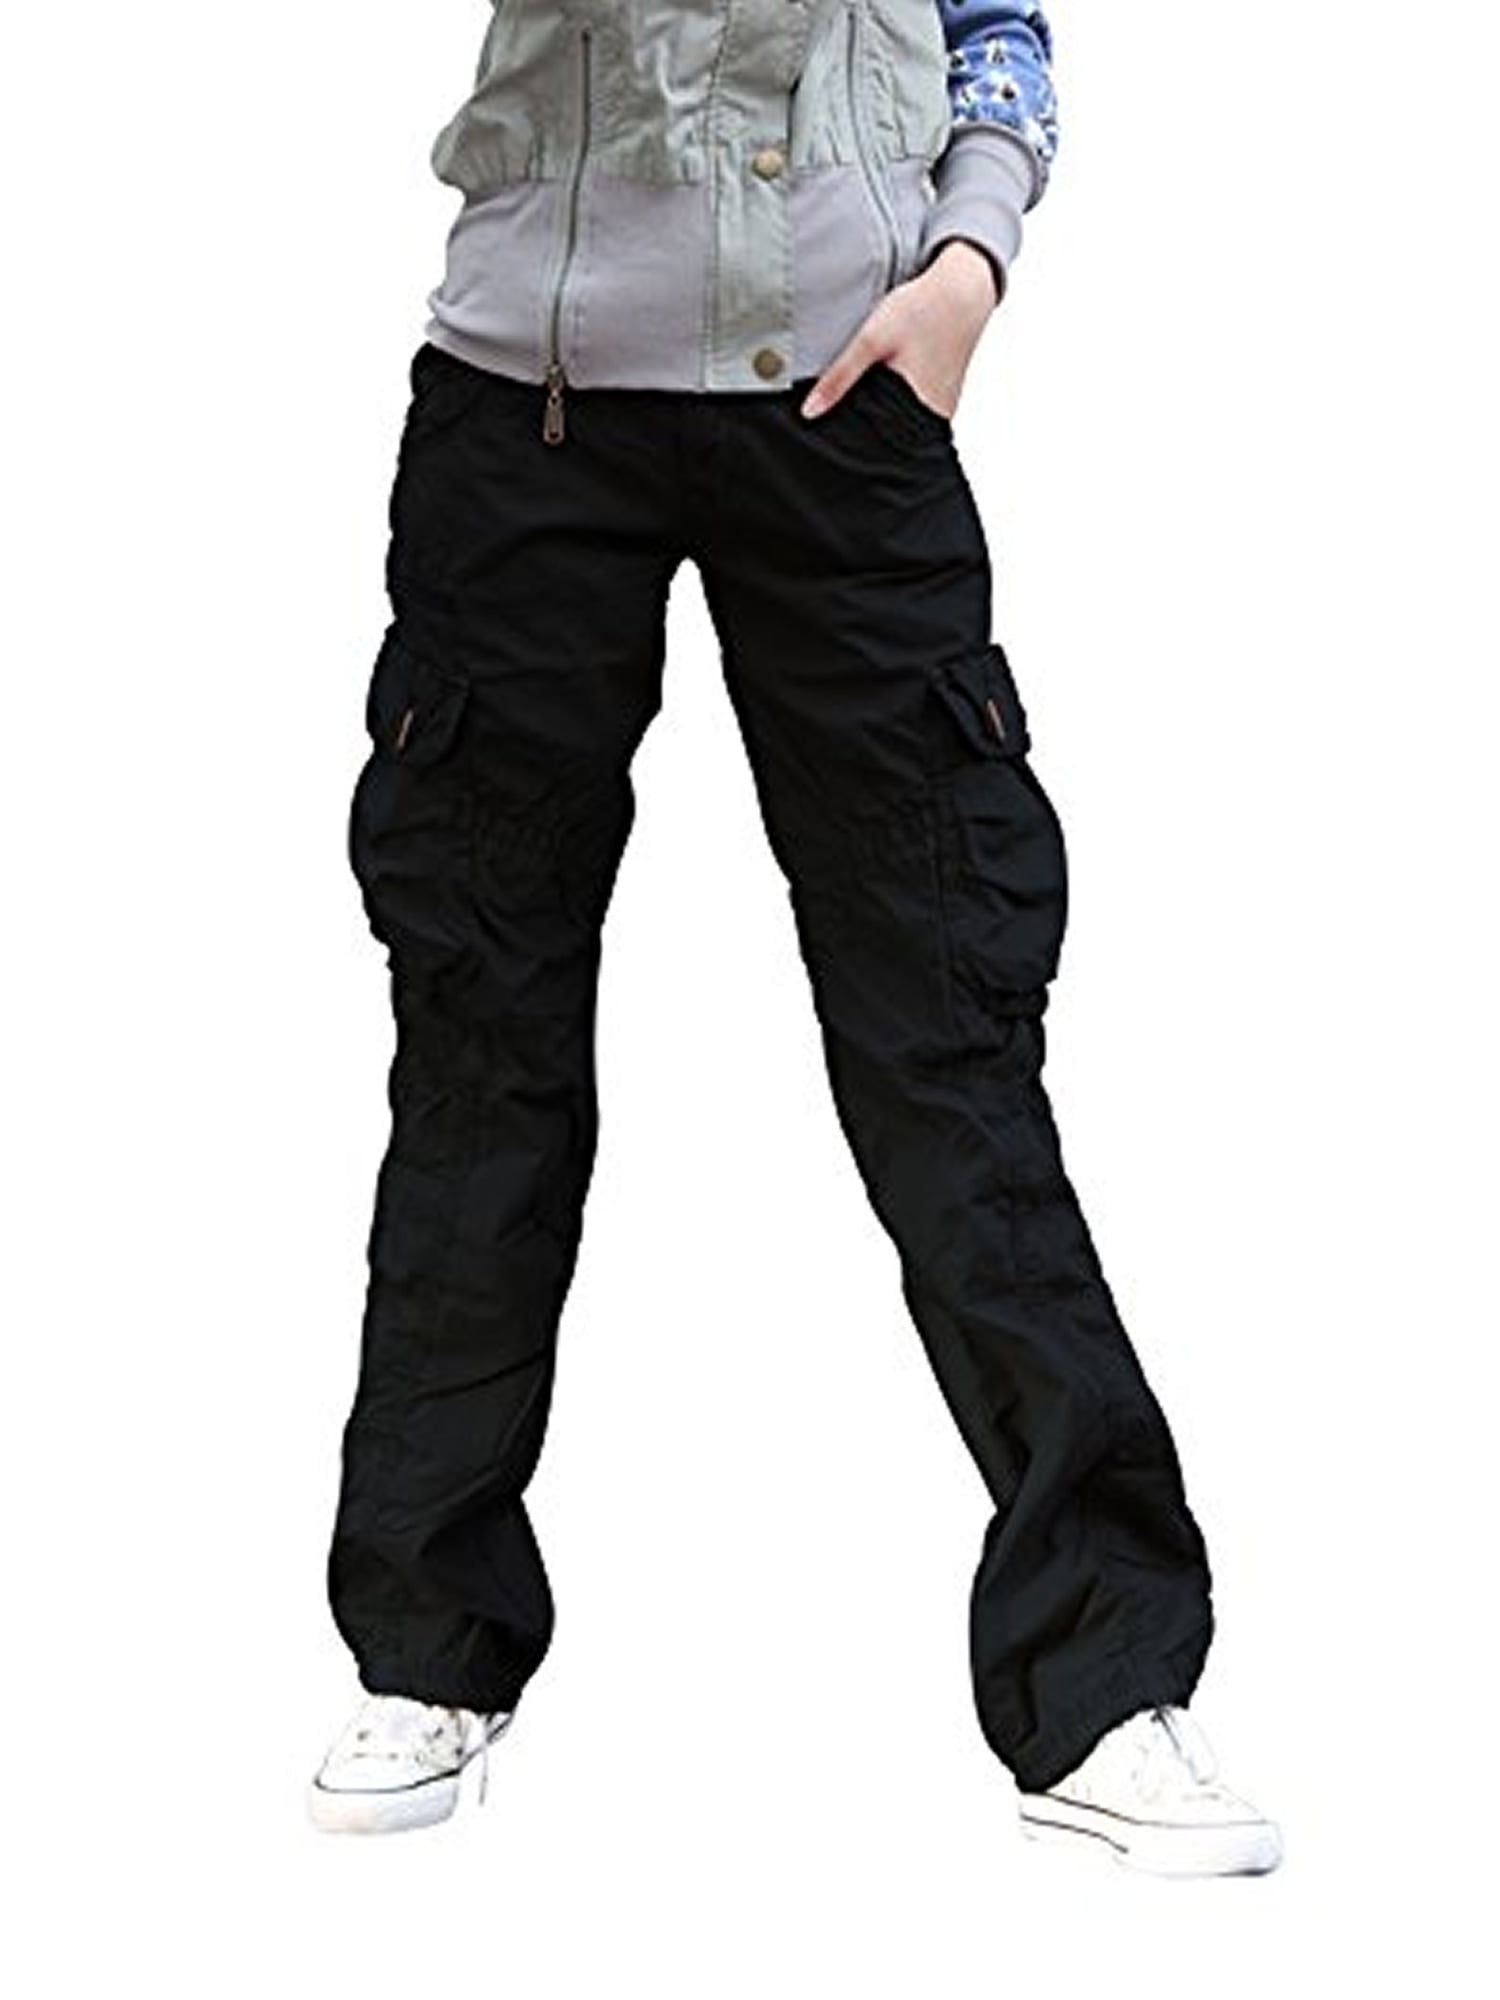 Womens Military Multi-pocket Combat Tactical Trousers Casual Hiking Cargo Pants 